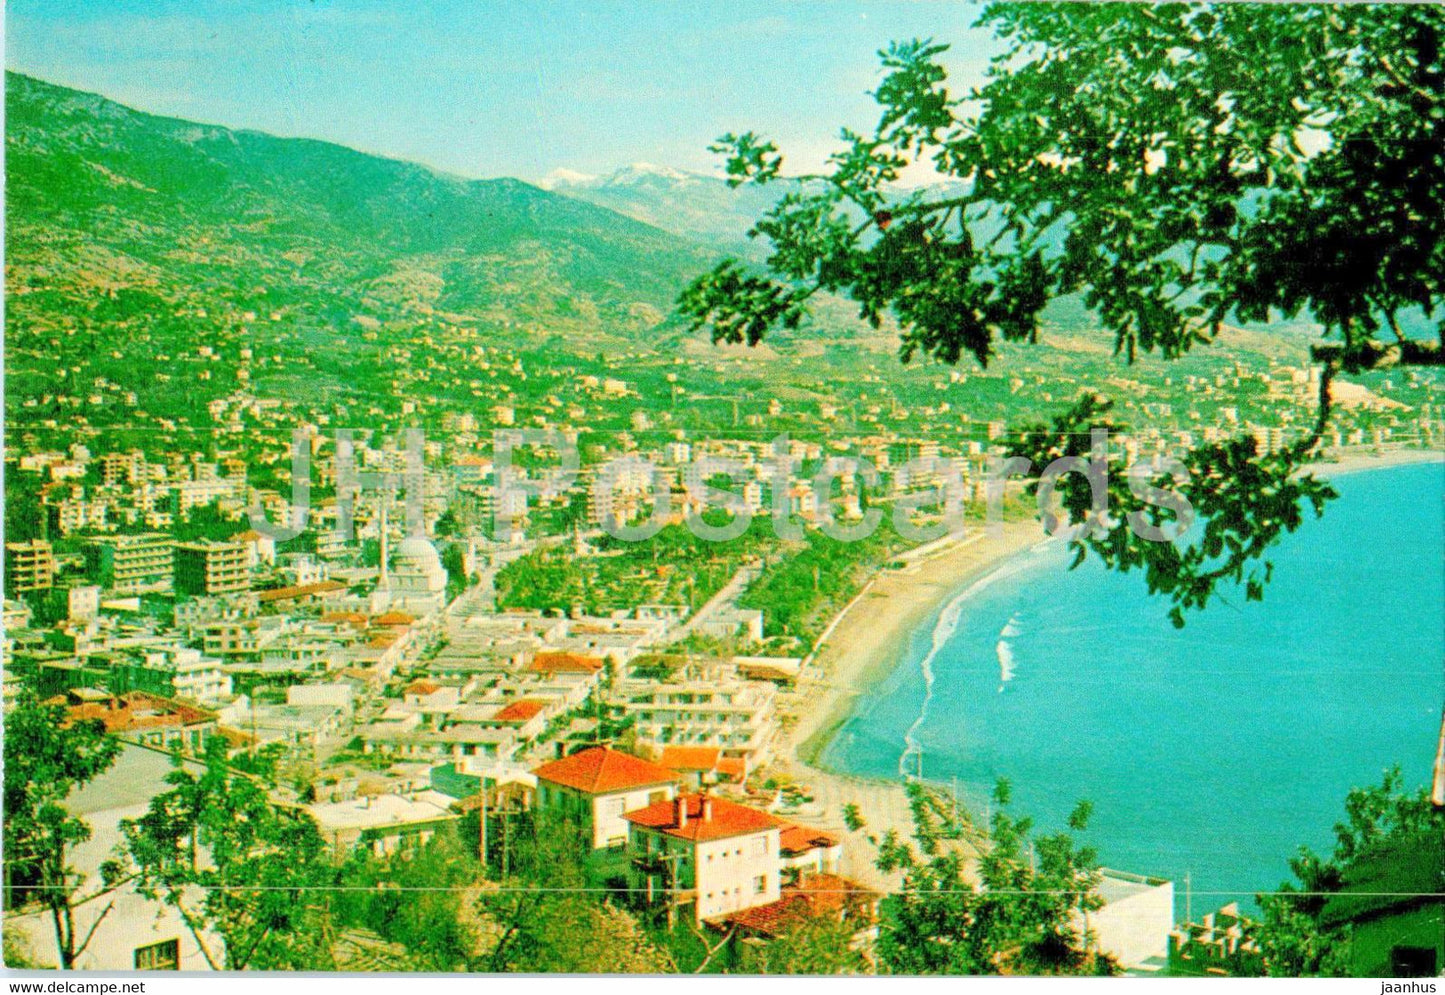 A view from Alanya - 109 - Turkey - unused - JH Postcards